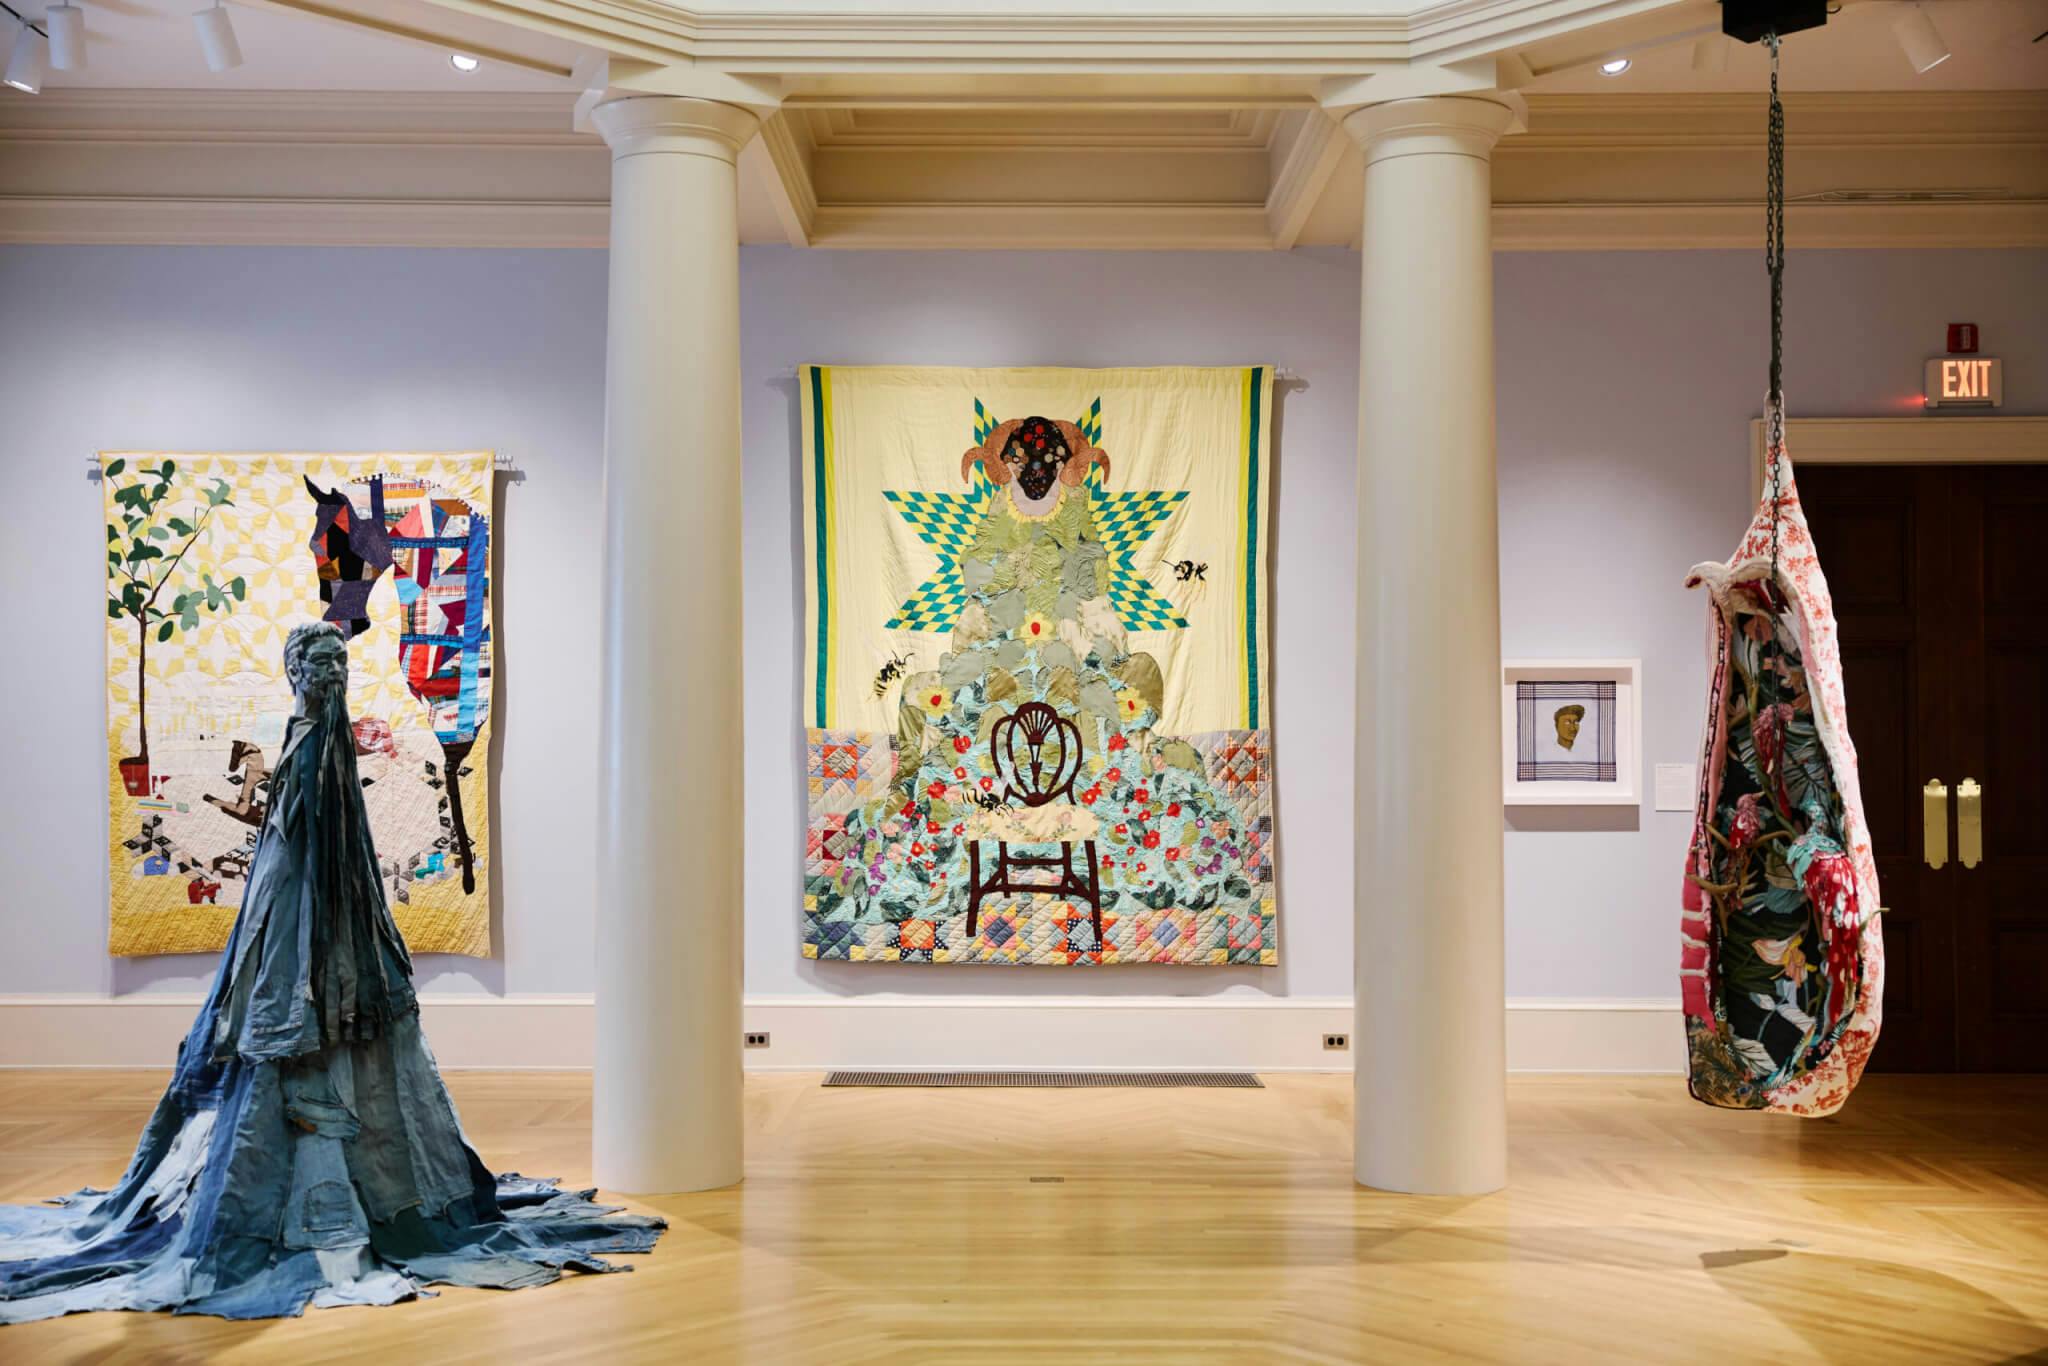 Colorful quilts hang from the walls of Newport Art Museum, while fabric-based installations also display in the space.